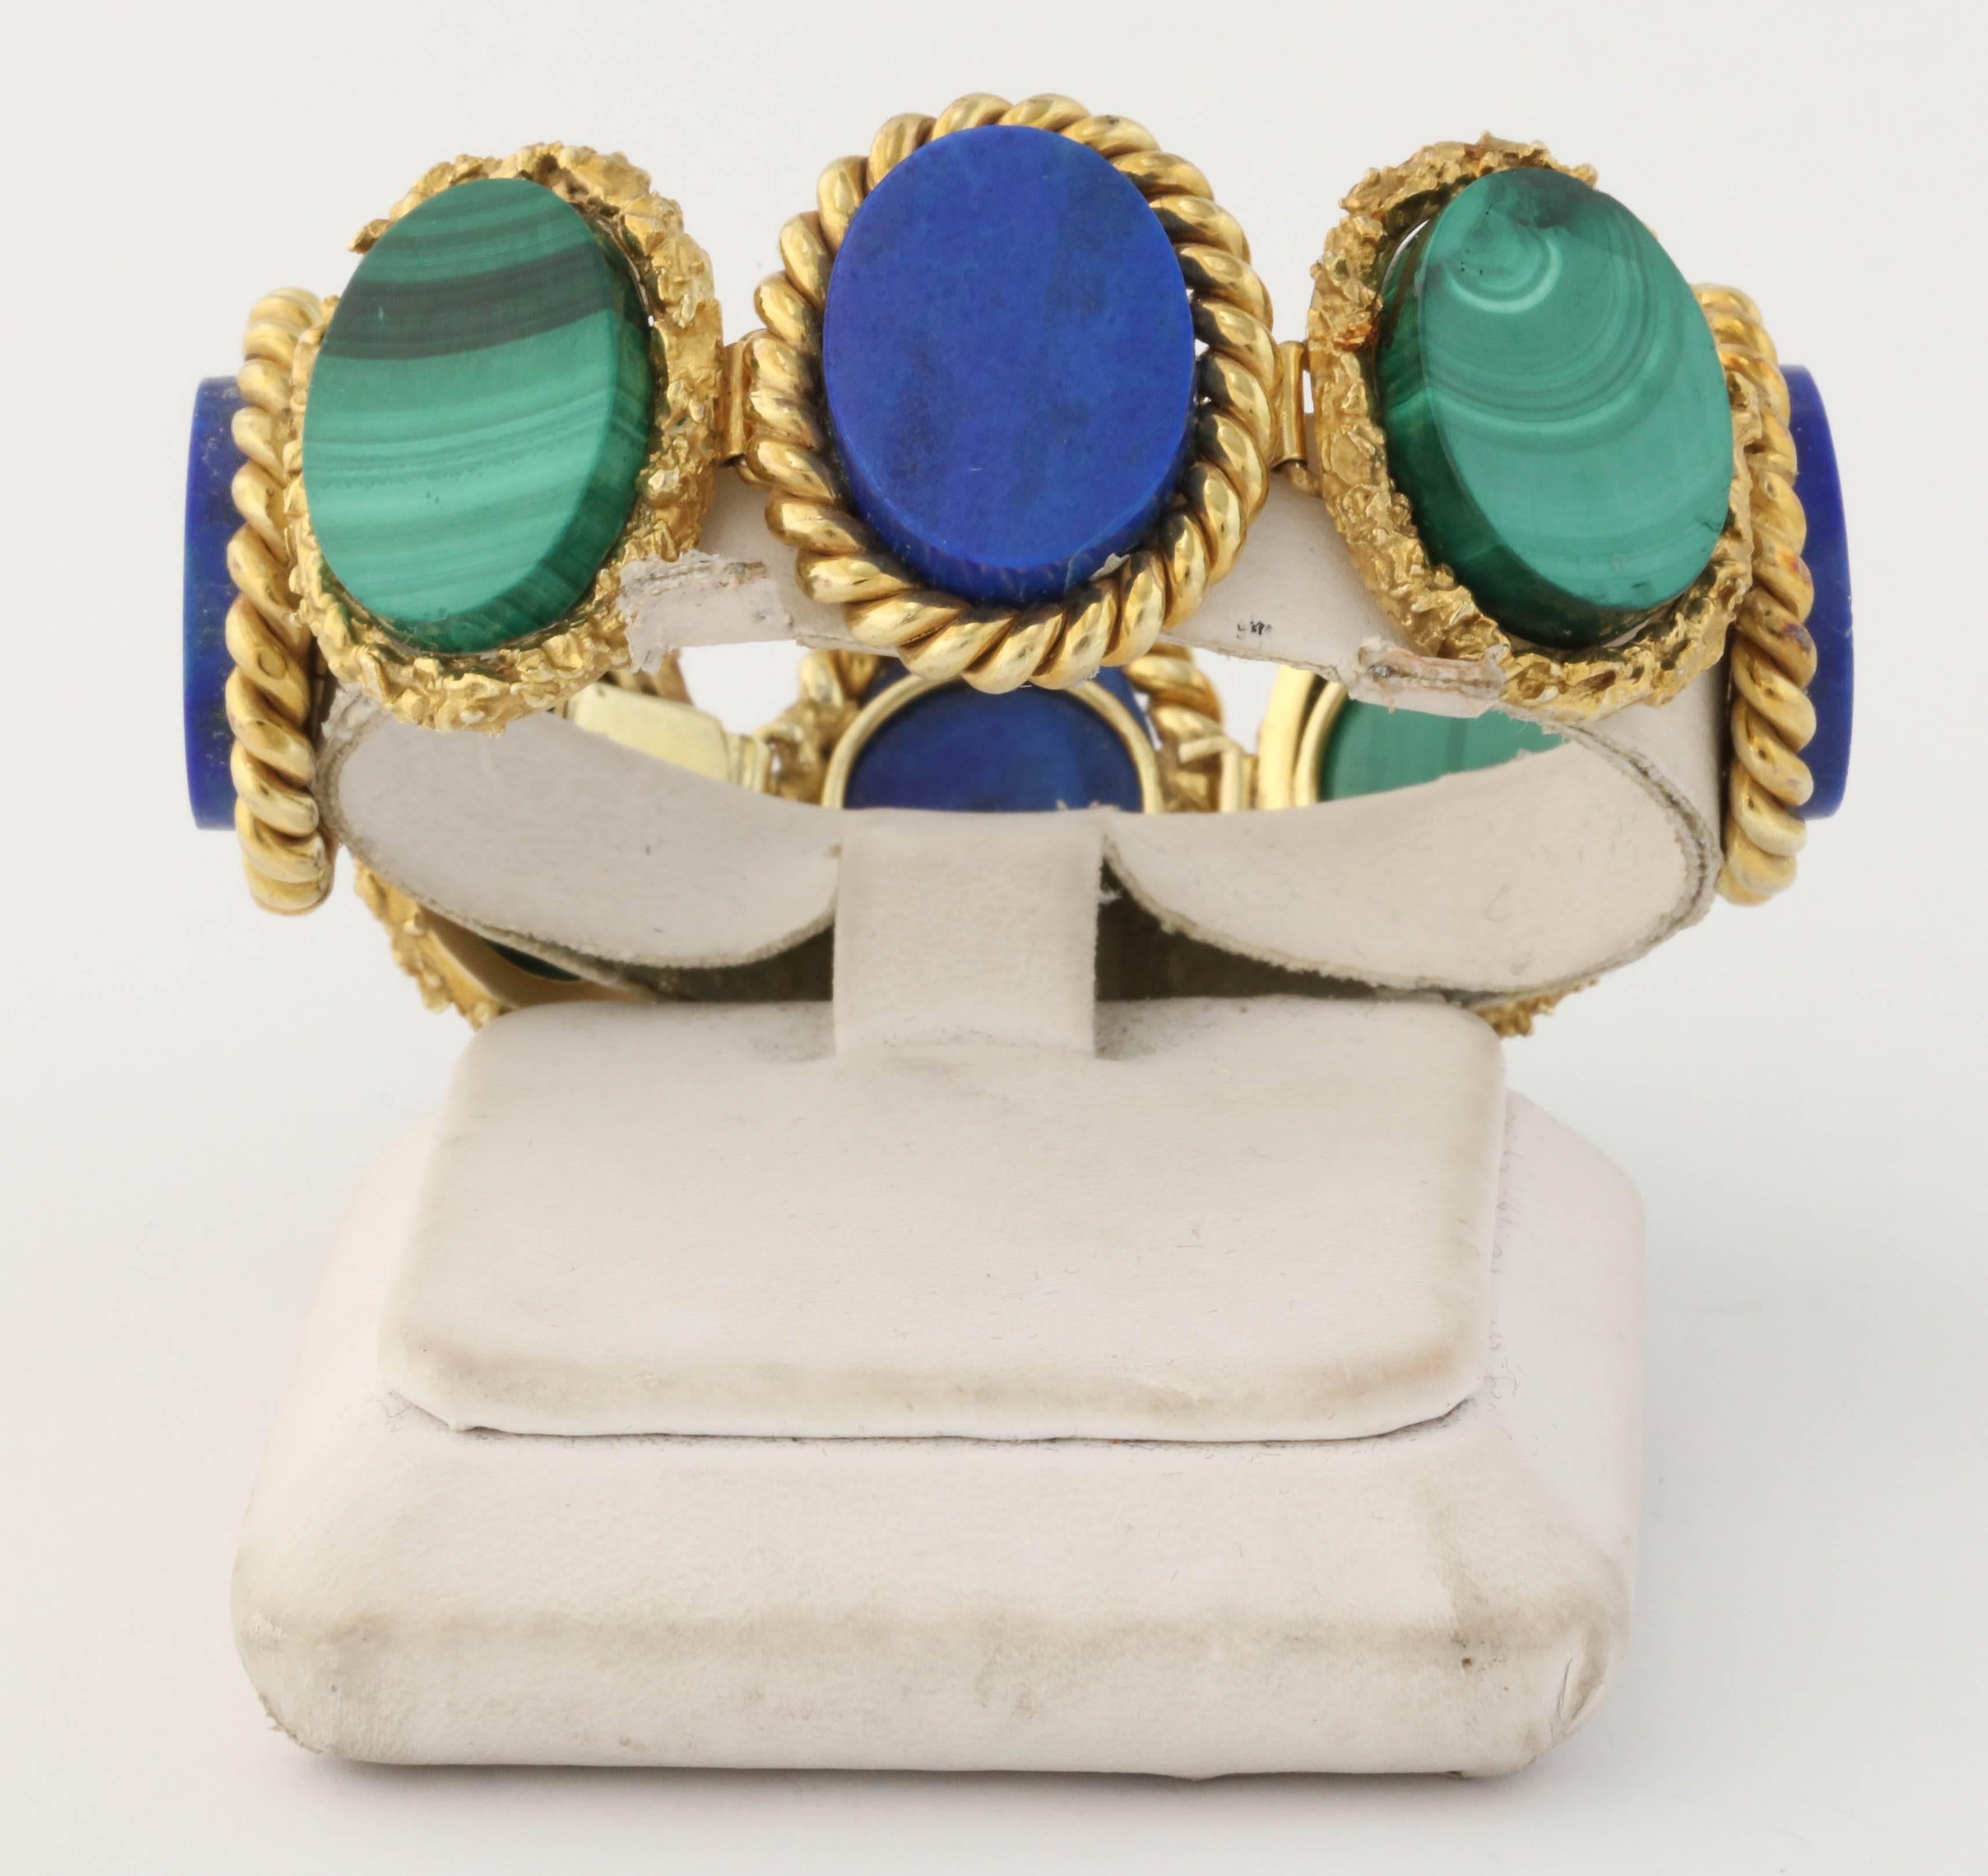 1960s High Quality Oval Cut Lapis Lazuli And Malachite Flexible Link Bracelet In Excellent Condition For Sale In New York, NY